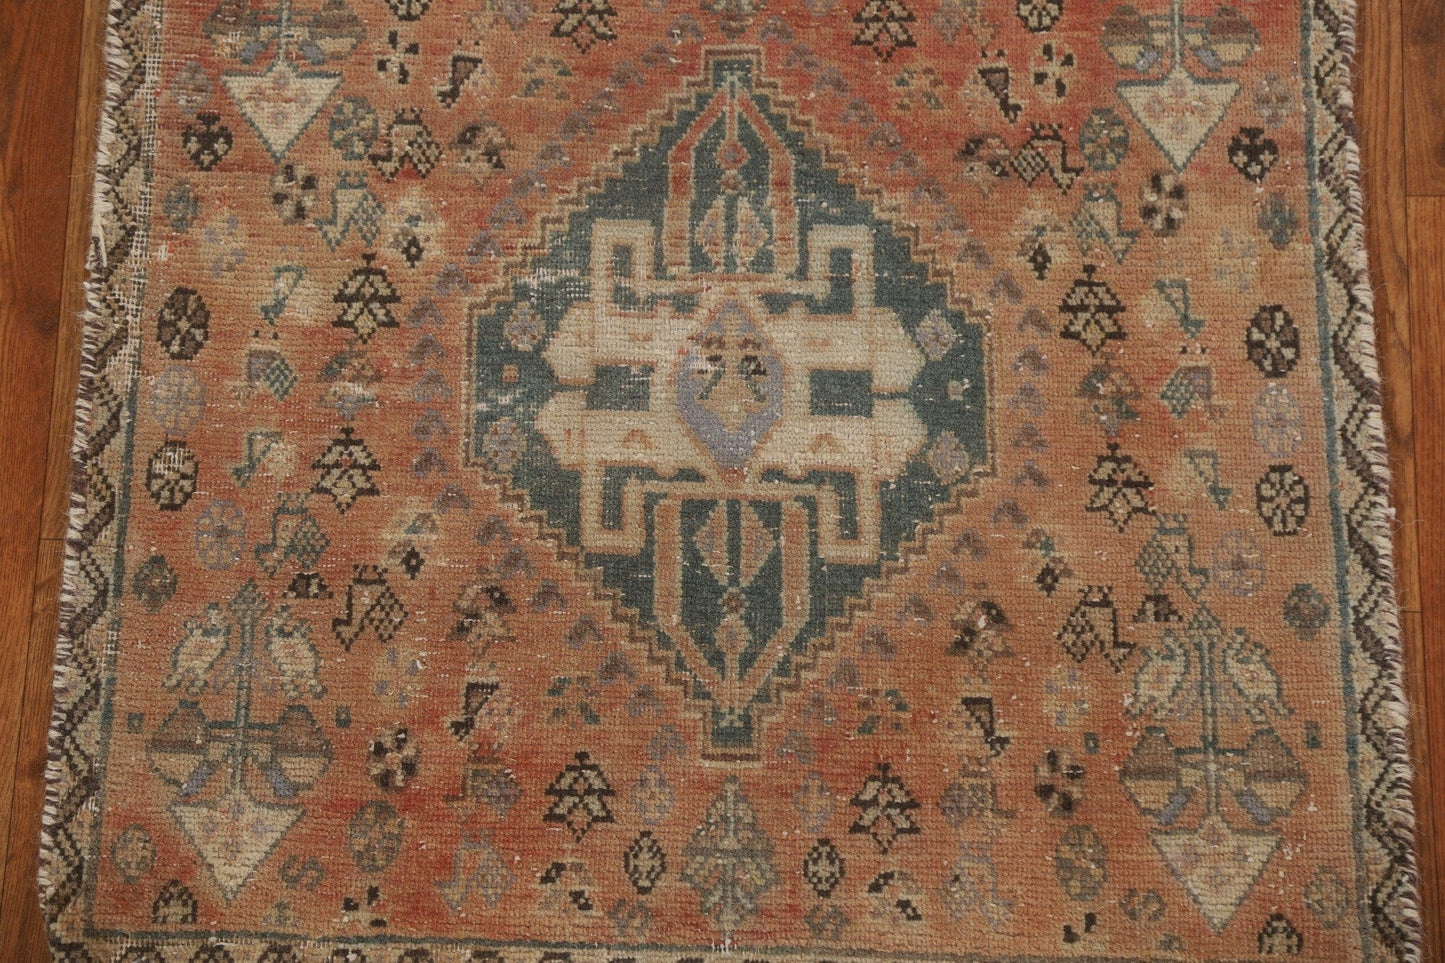 Set of 2 Tribal Abadeh Persian Square Rugs 2x2